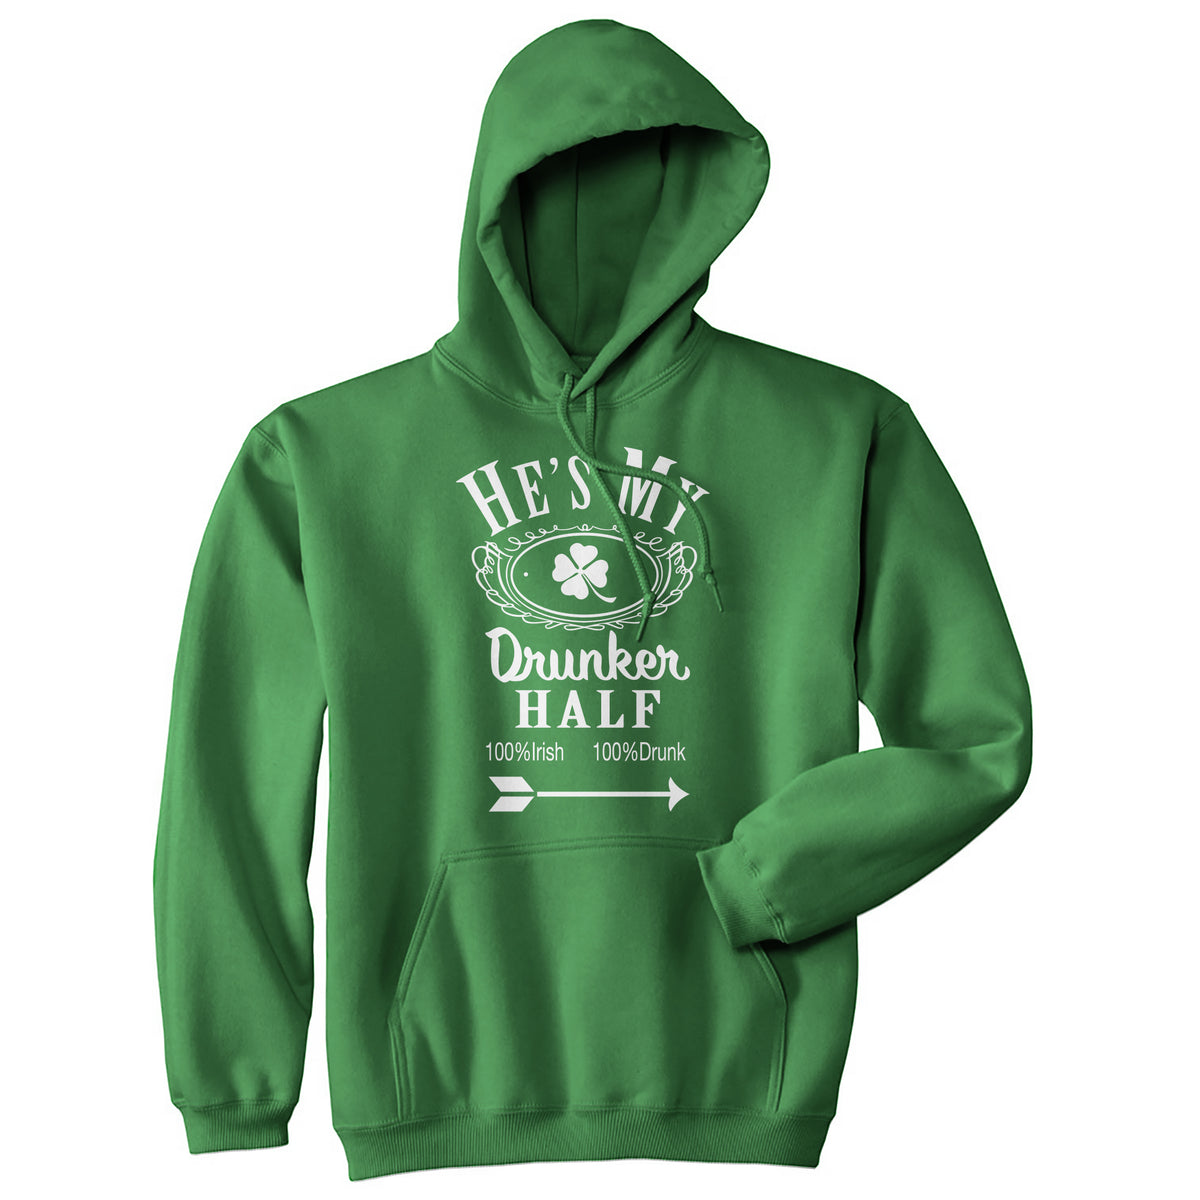 Funny Heather Green - Hes Hes/Shes My Drunker Half Hoodie Hoodie Nerdy Saint Patrick&#39;s Day Drinking Tee